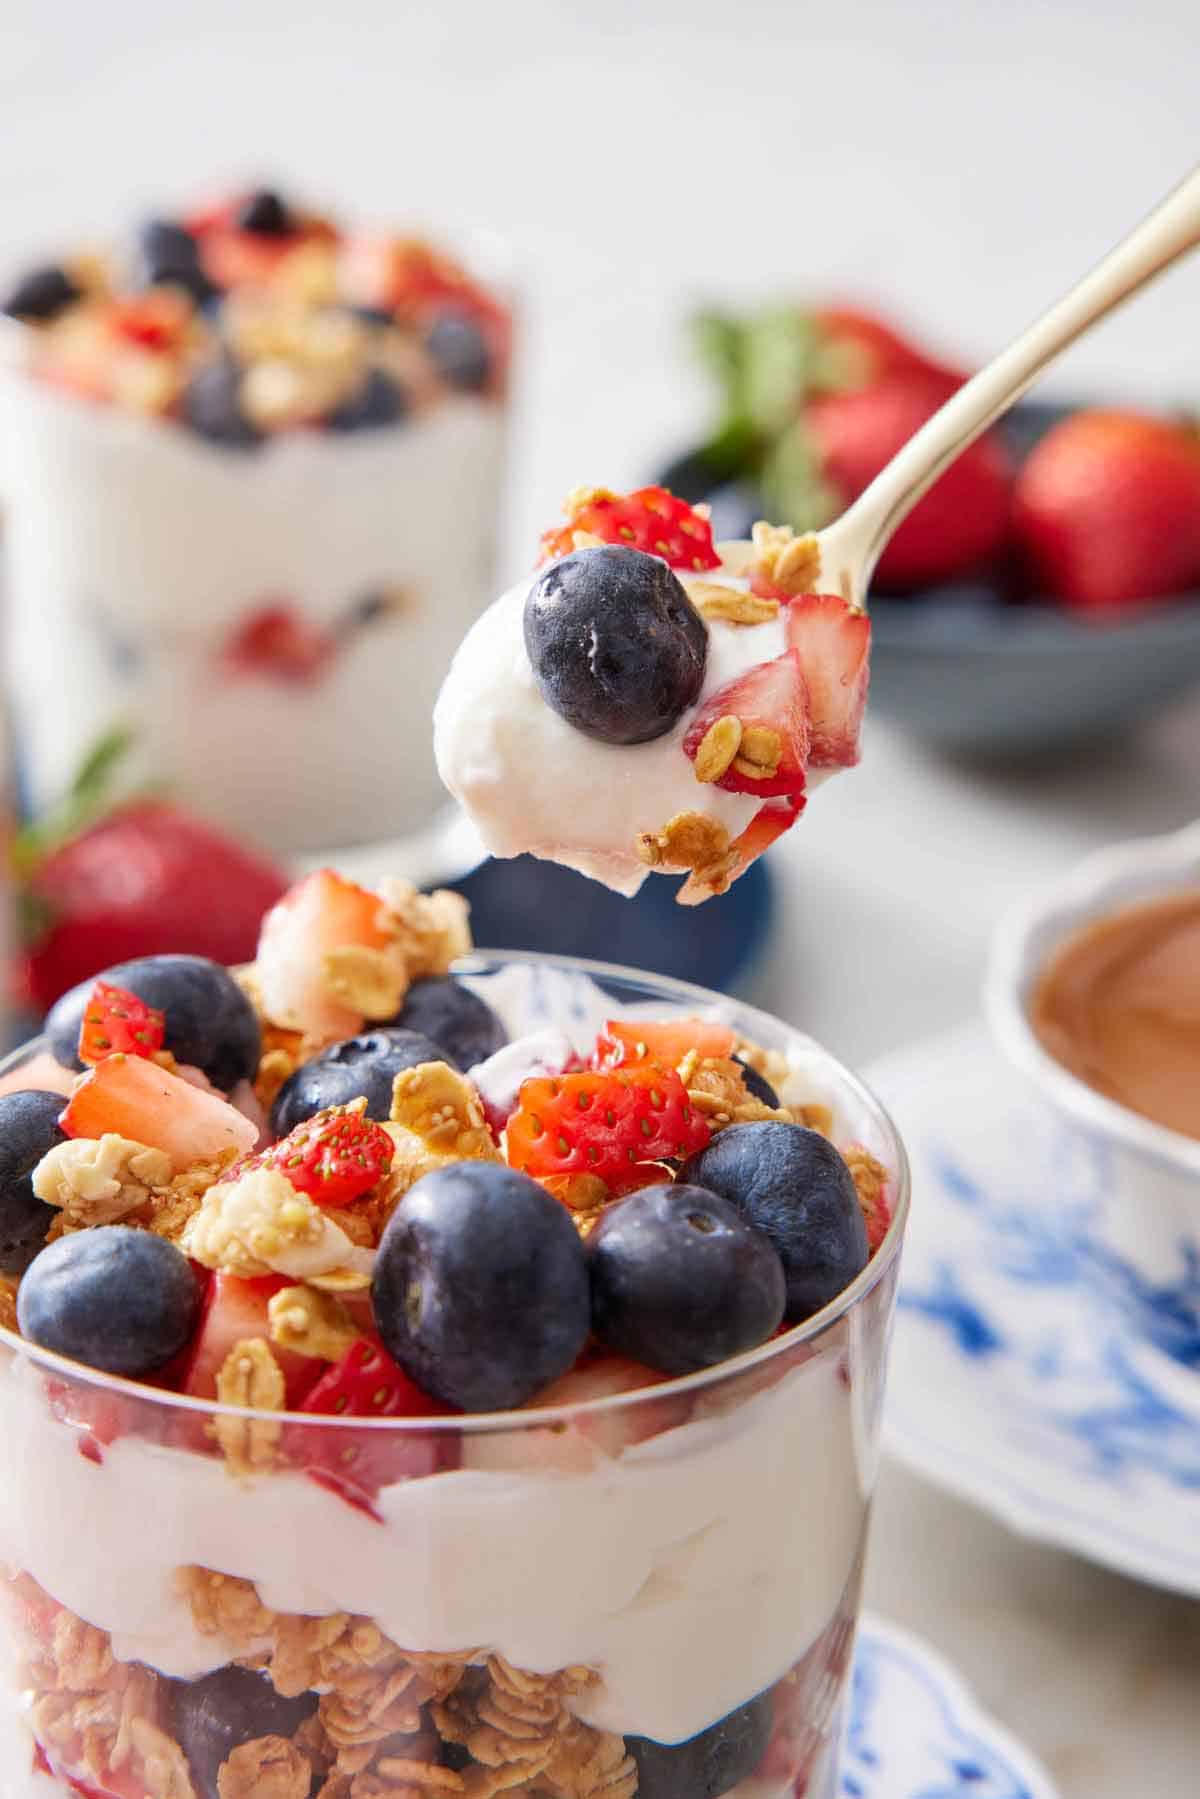 A spoonful of yogurt parfait lifted from the glass.